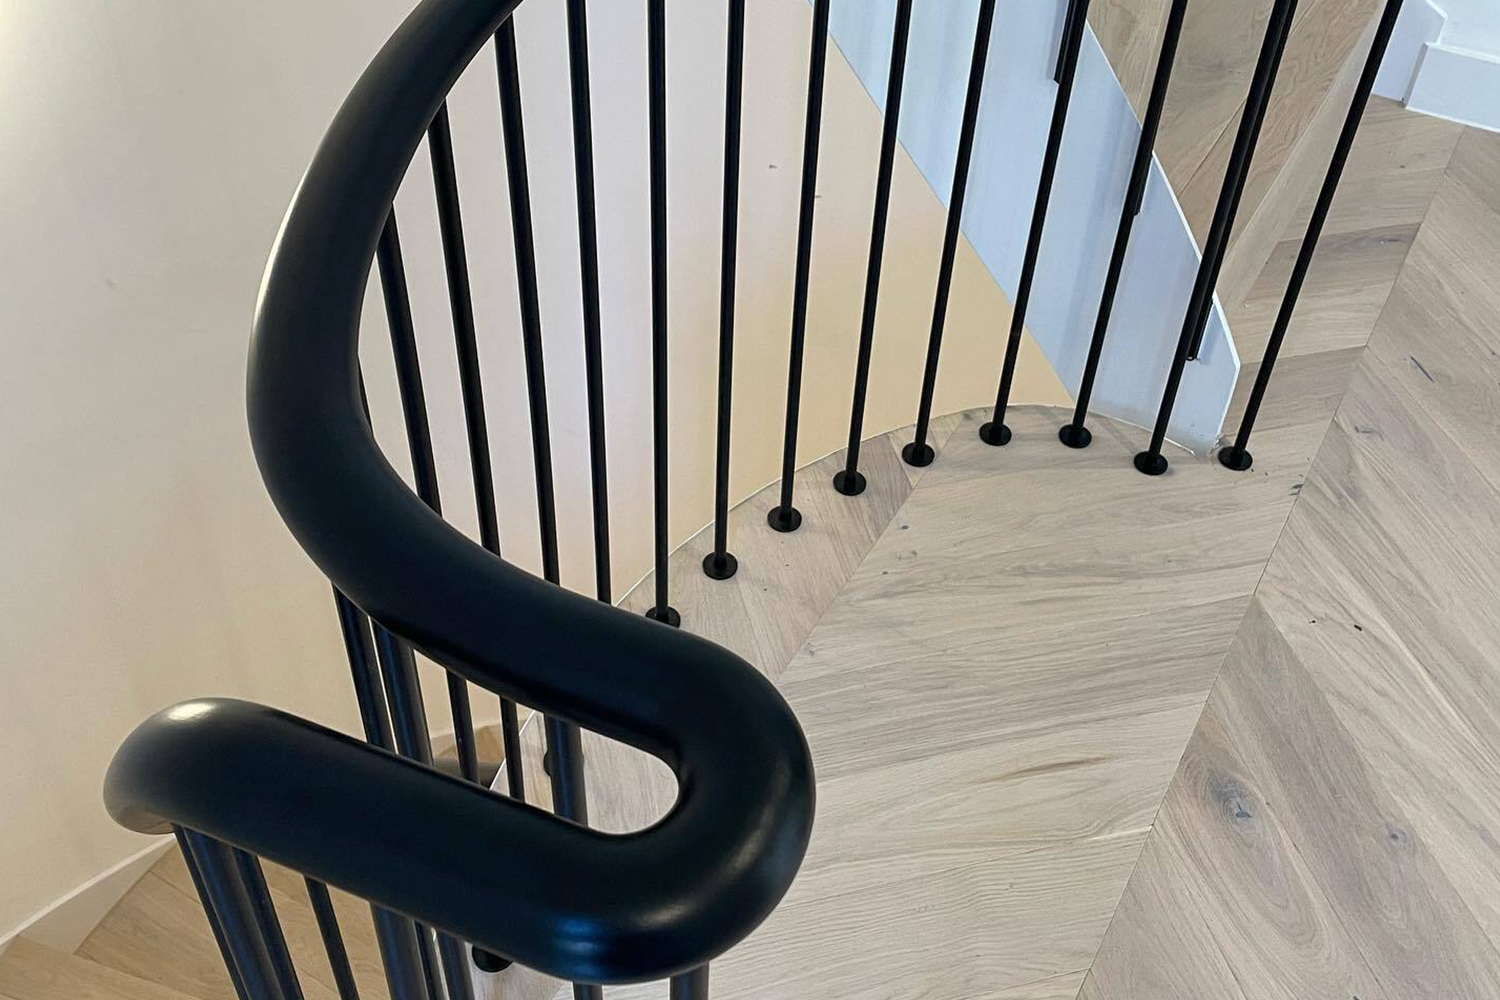 A black handrail on a staircase after finishing